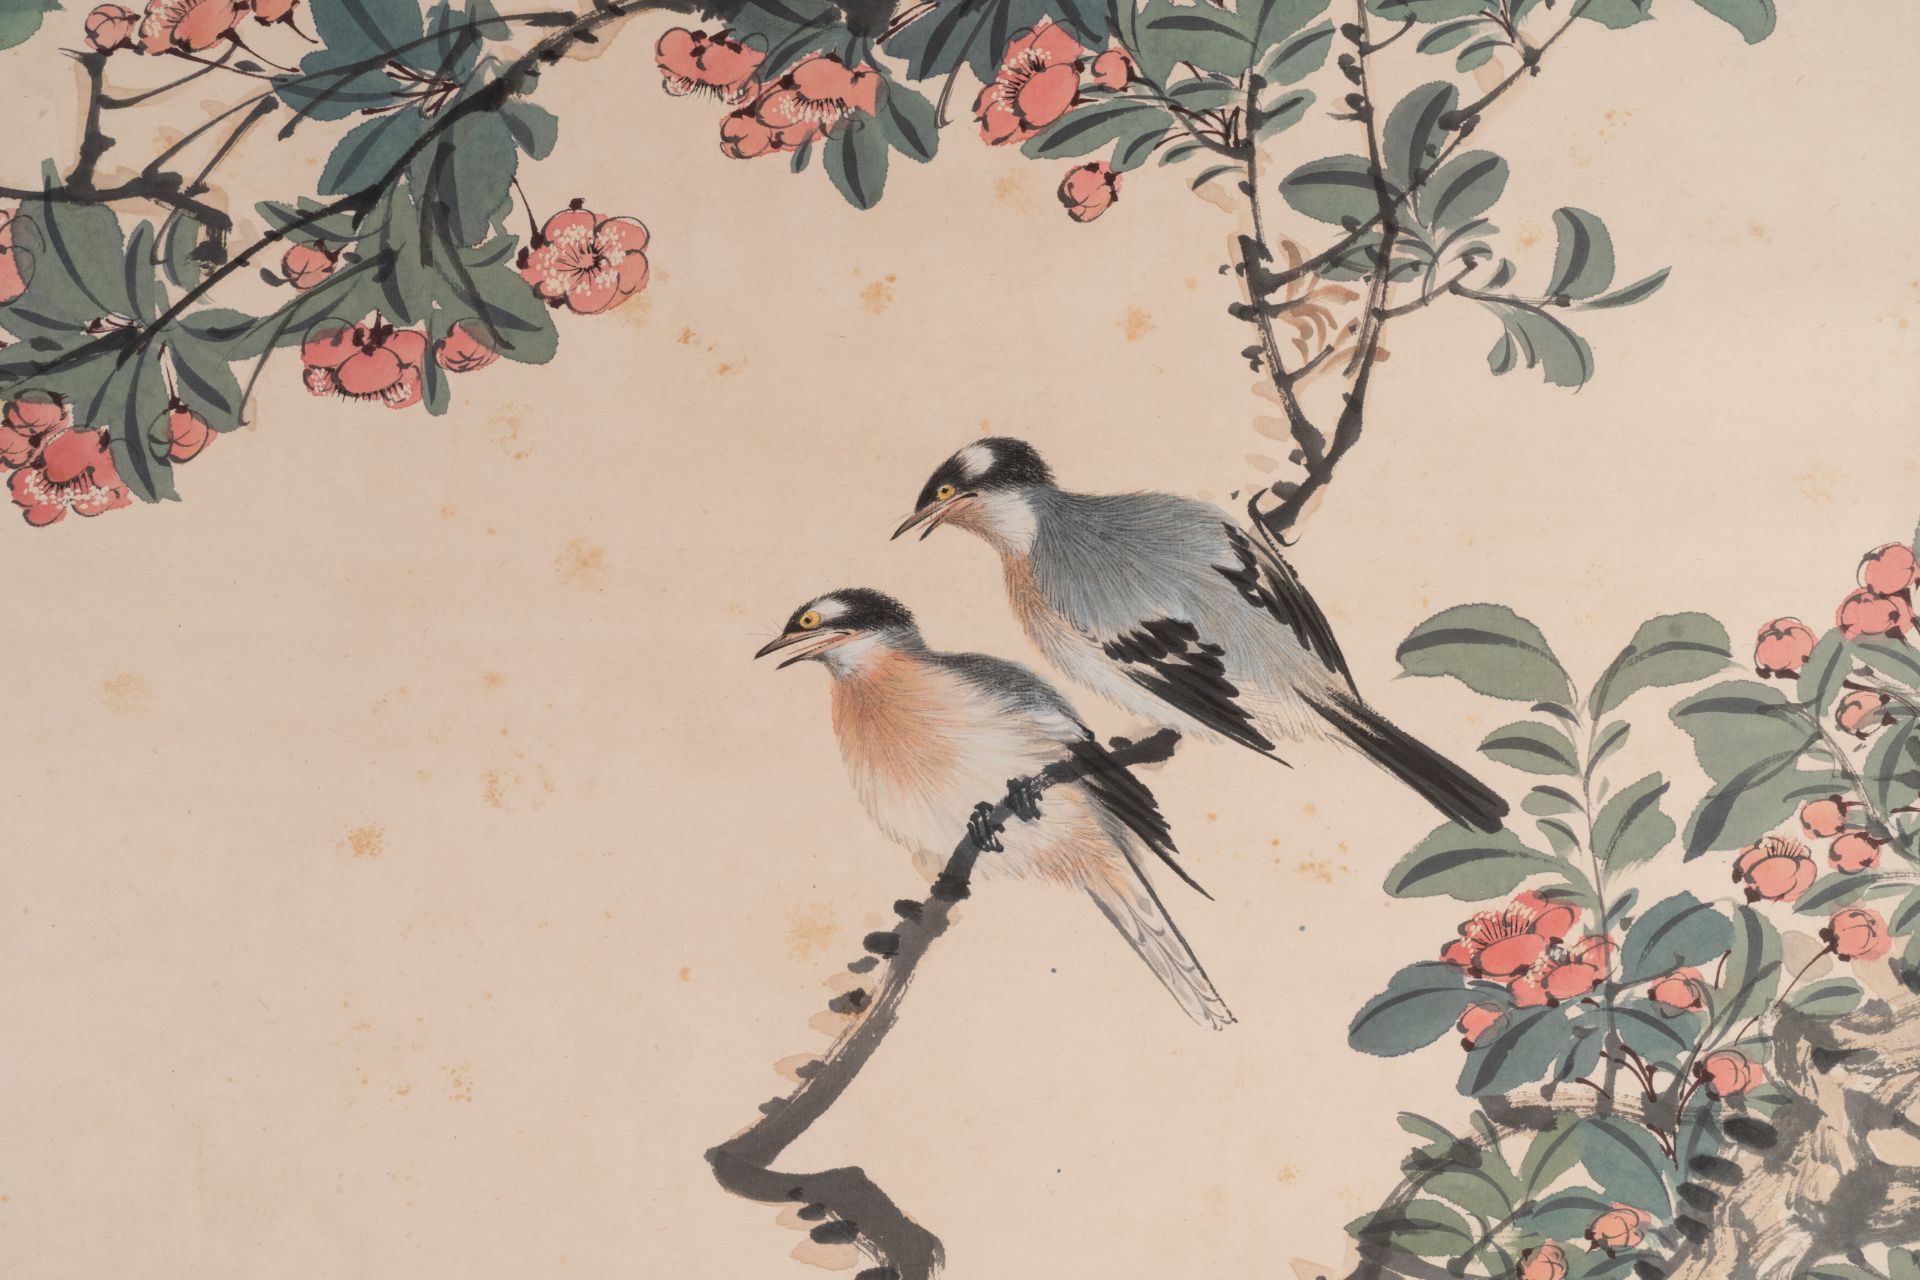 Tian Shiguang ç”°ä¸–å…‰ (1916-1999): 'Birds and flowers', ink and colour on paper - Image 7 of 7